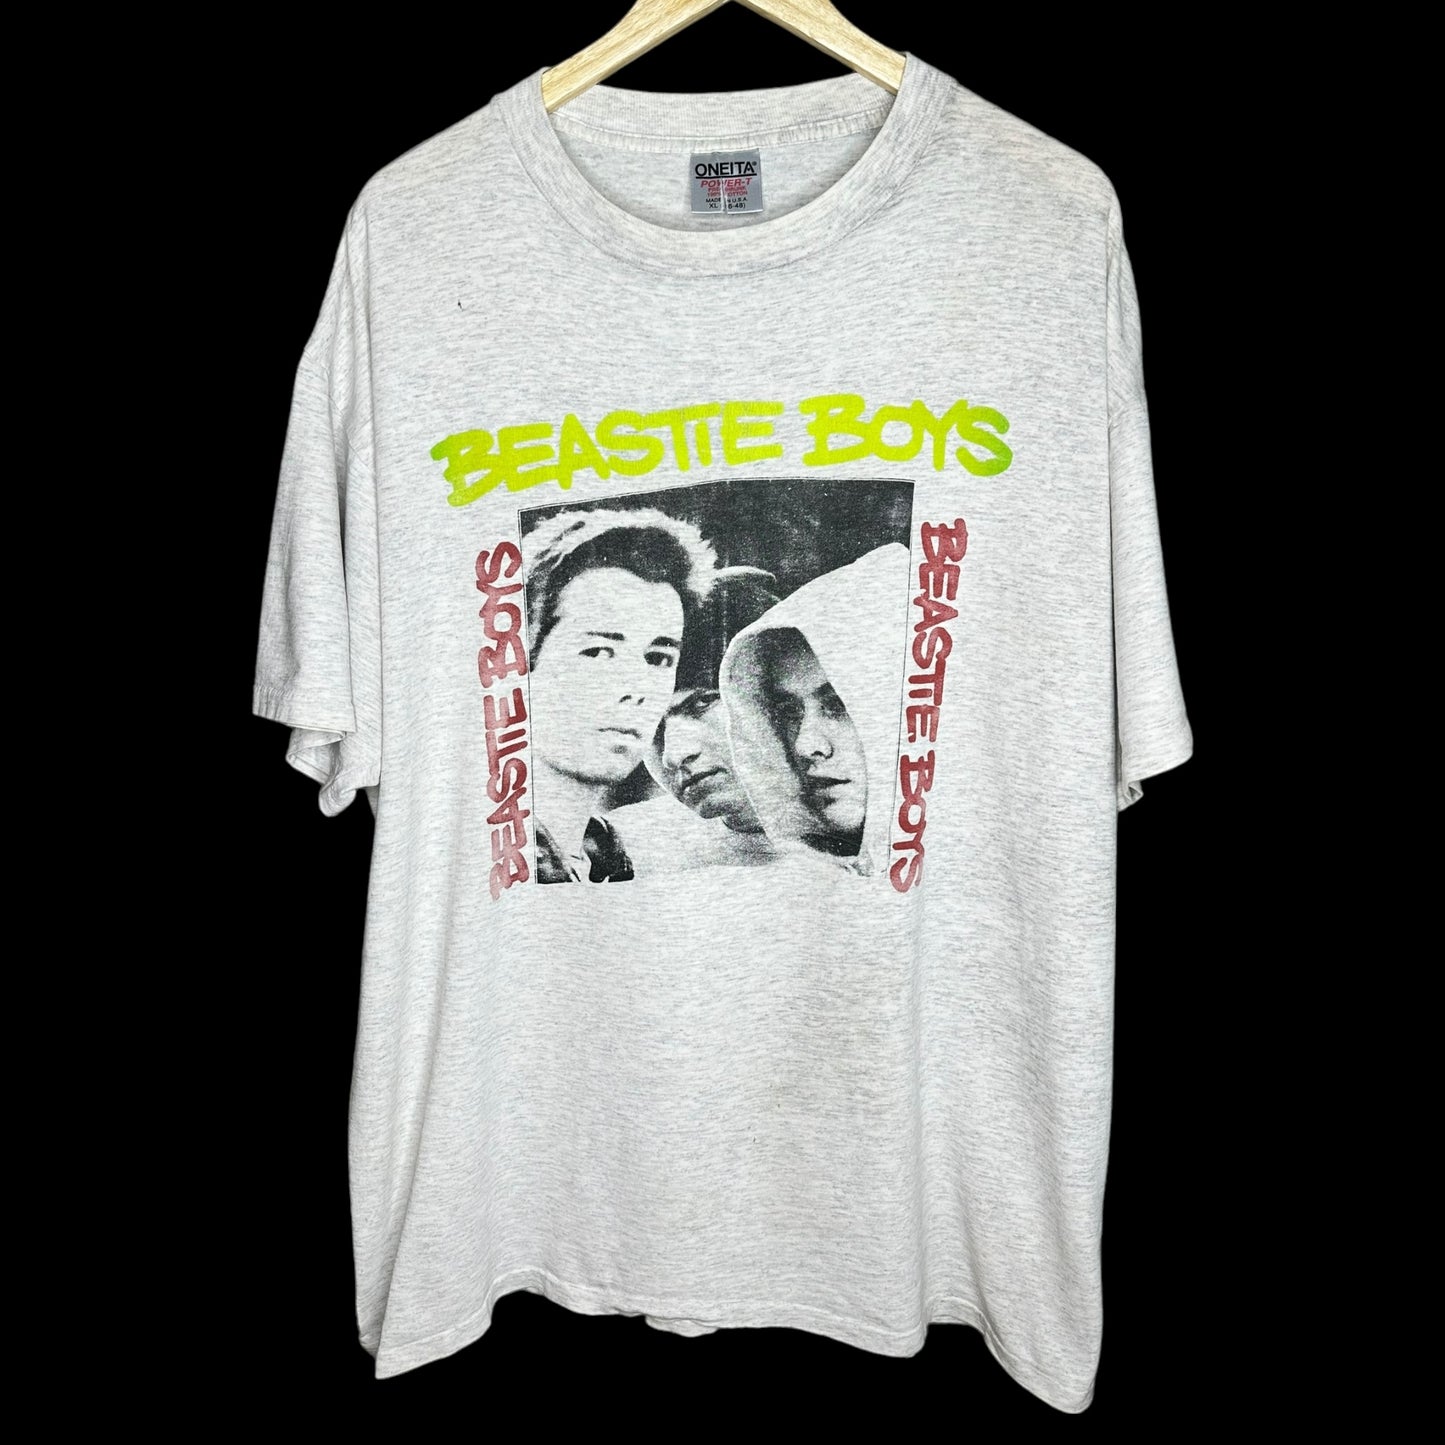 Vintage 1992 Beastie Boys T-Shirt XL (with L7 and House of Pain)